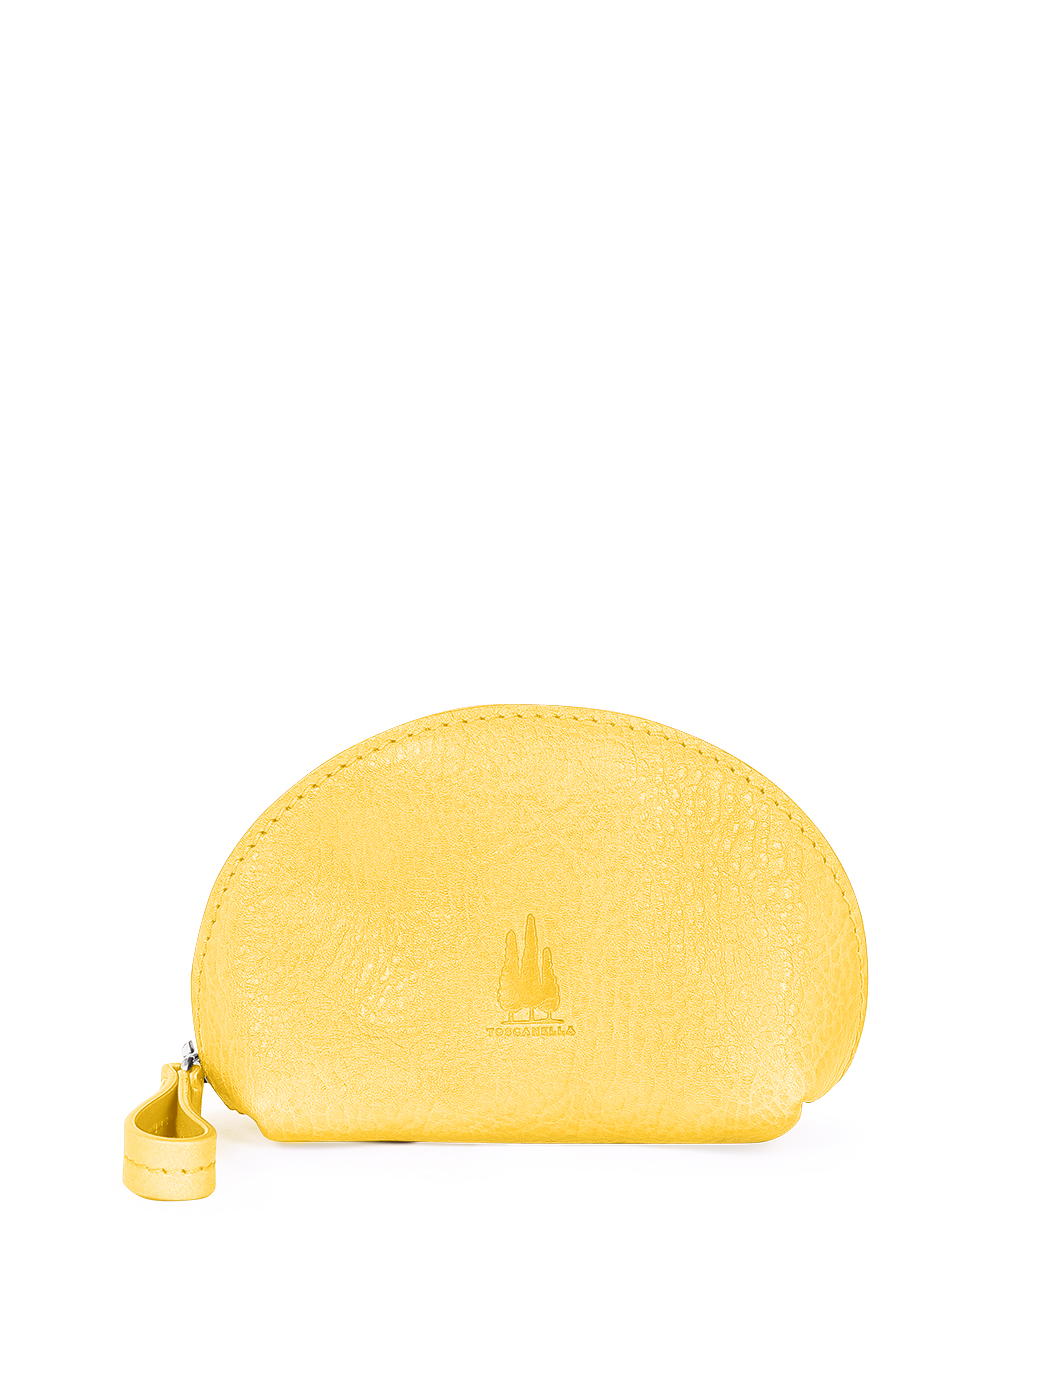 Women's Medium Clamshell Pouch in Leather Saffron